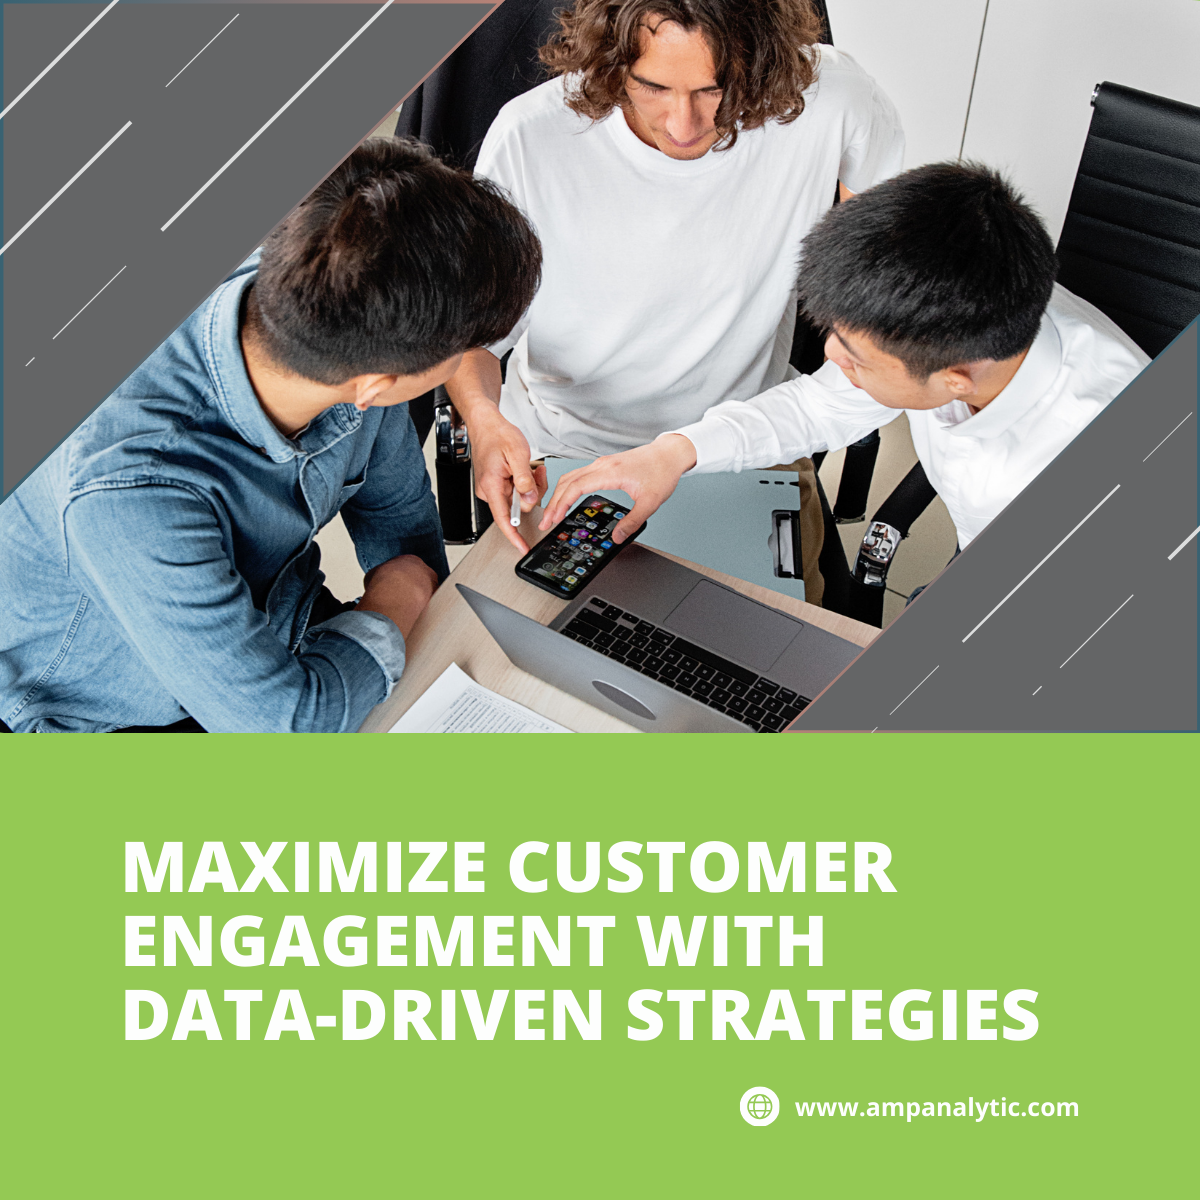 Maximize customer engagement with data-driven strategies